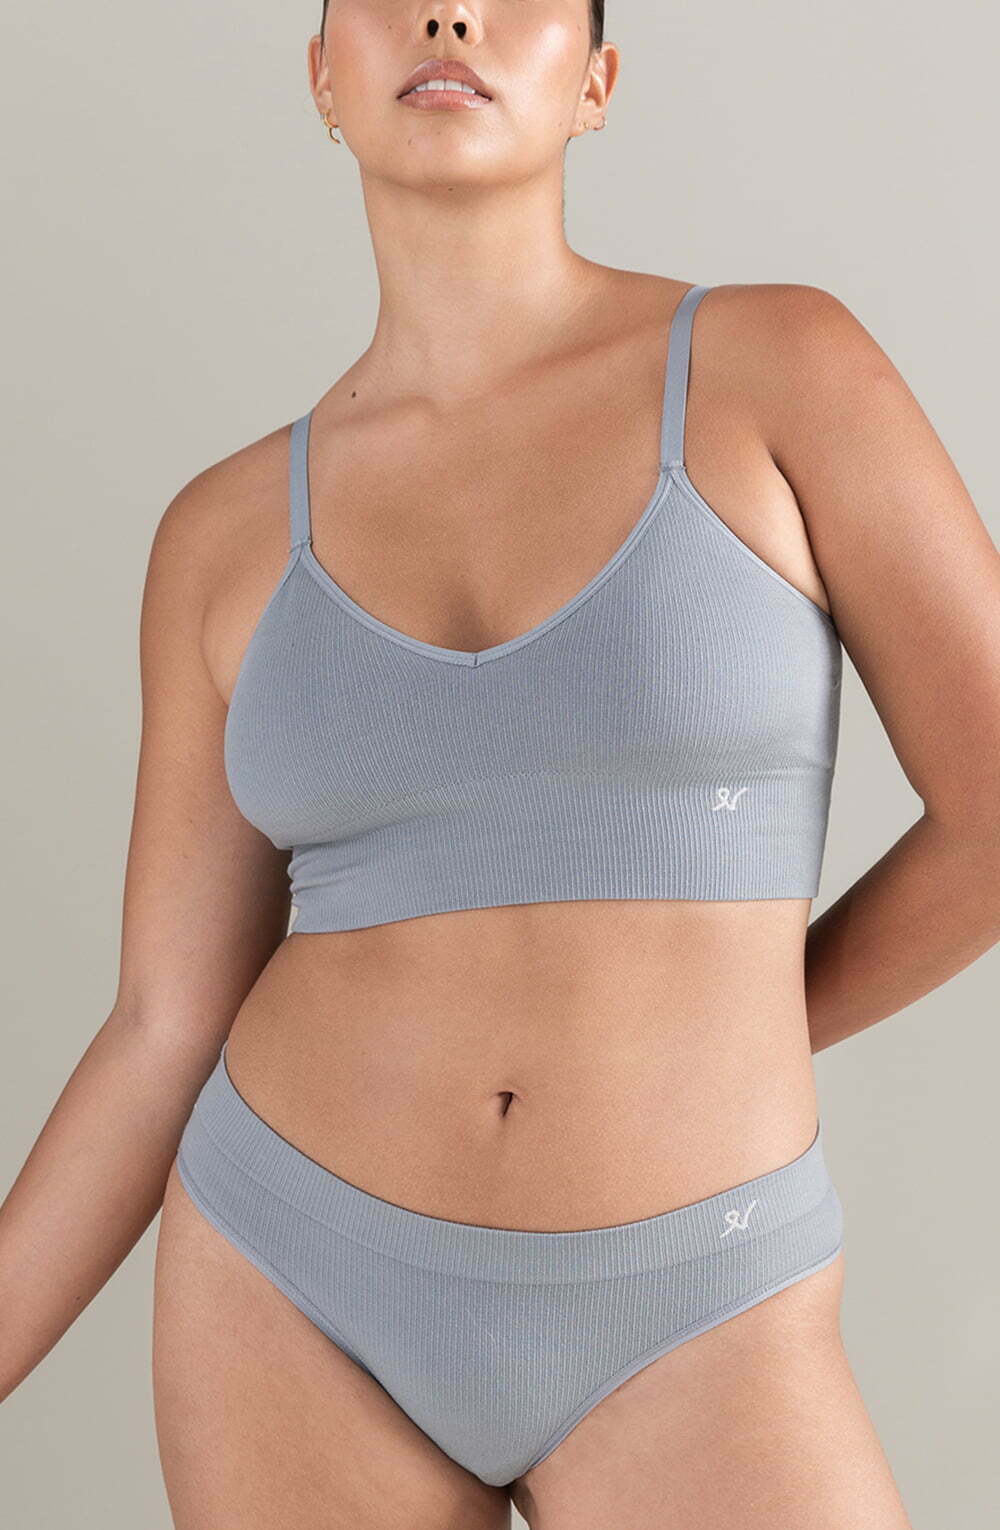 Vibrators, Sex Toy Kits and Sex Toys at Cloud9Adults - The TENCEL™ Seamless Bralette Storm Grey - Buy Sex Toys Online